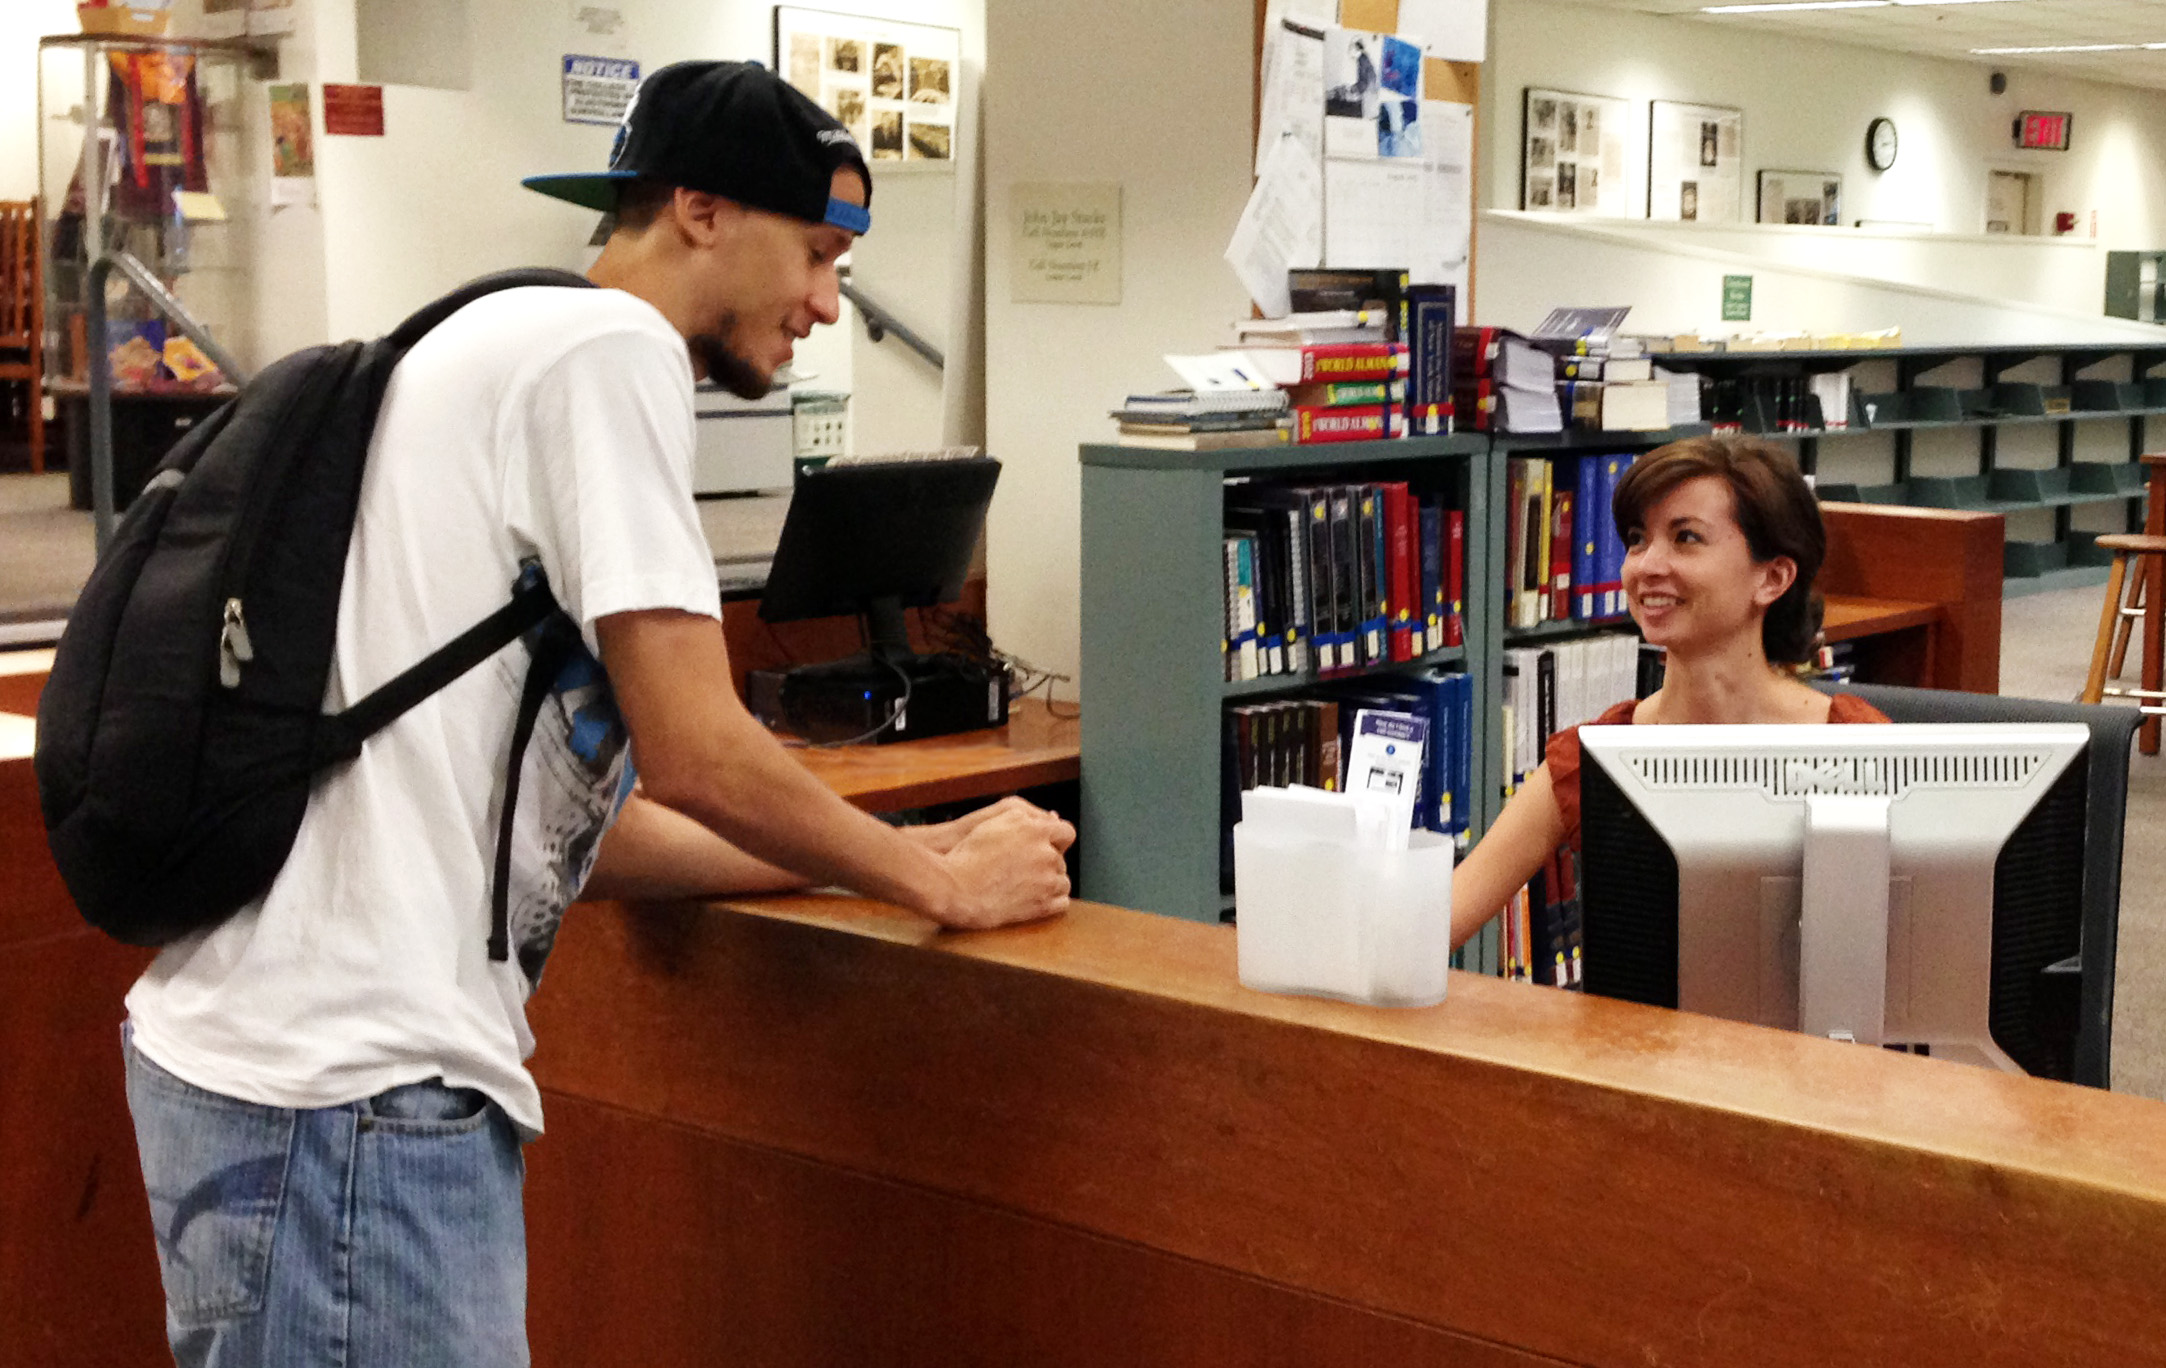 Librarian helping student